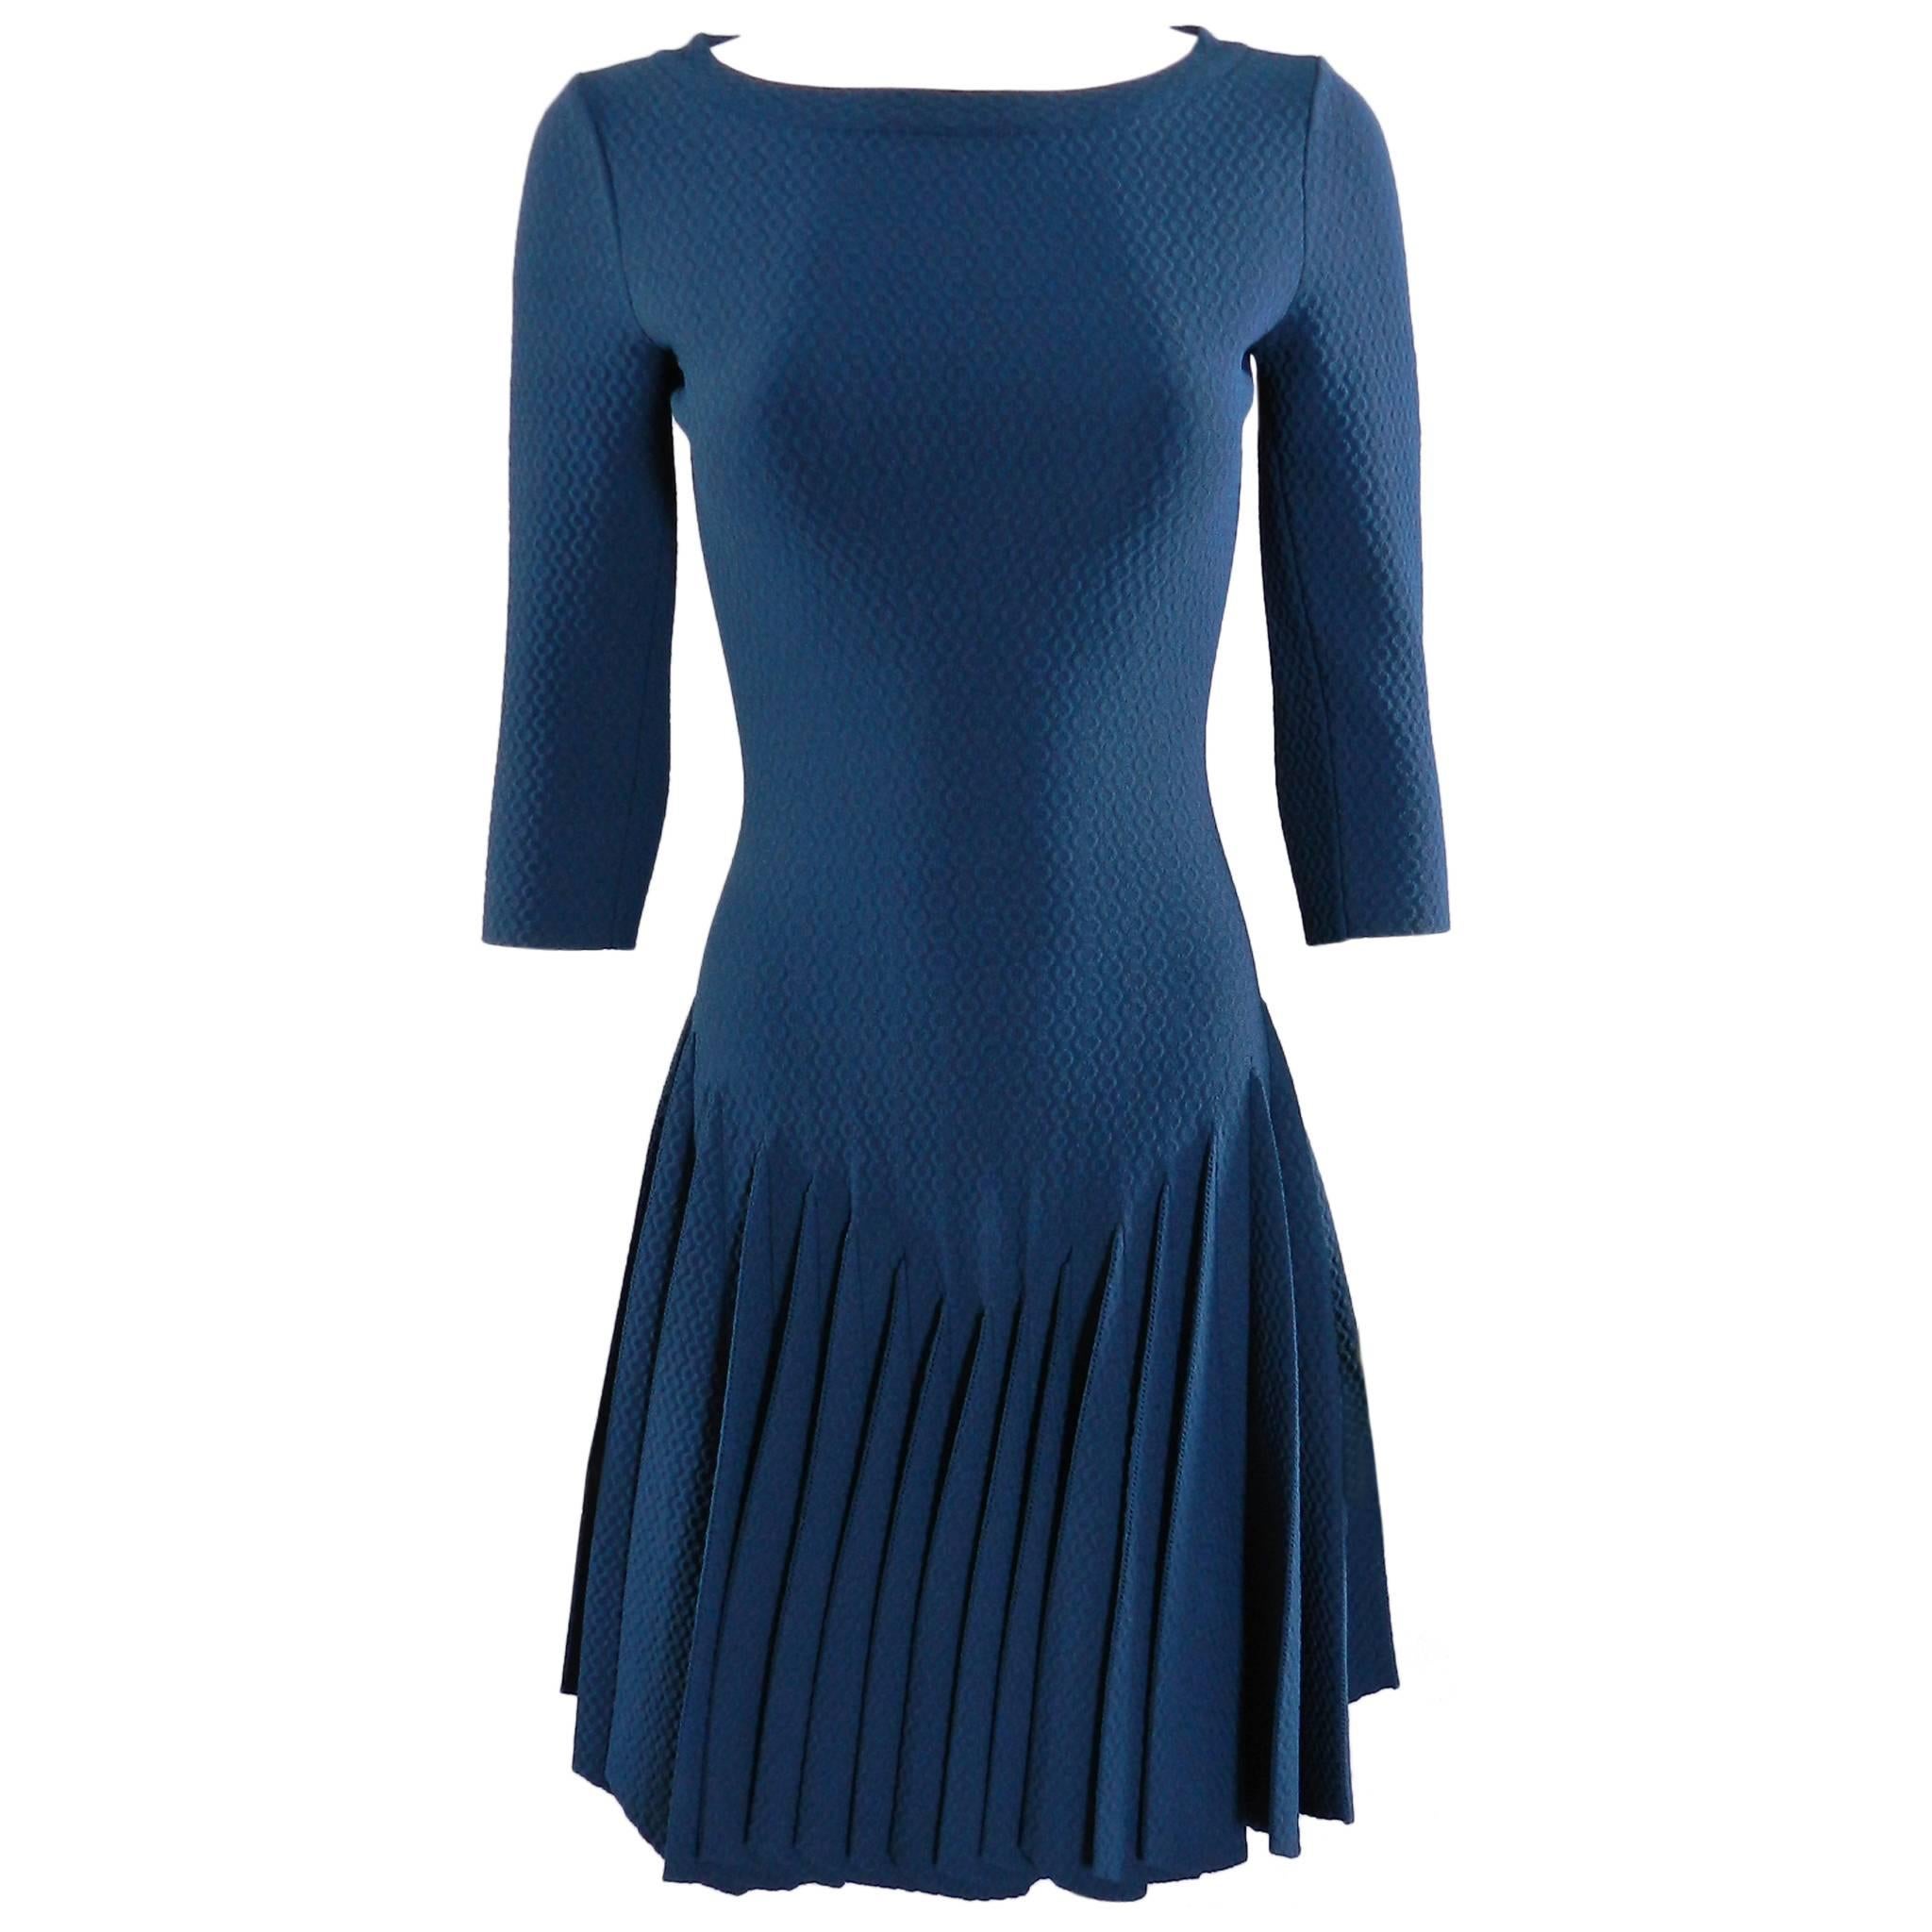 Alaia Prussian Blue Fit and Flare Knit Jersey Dress